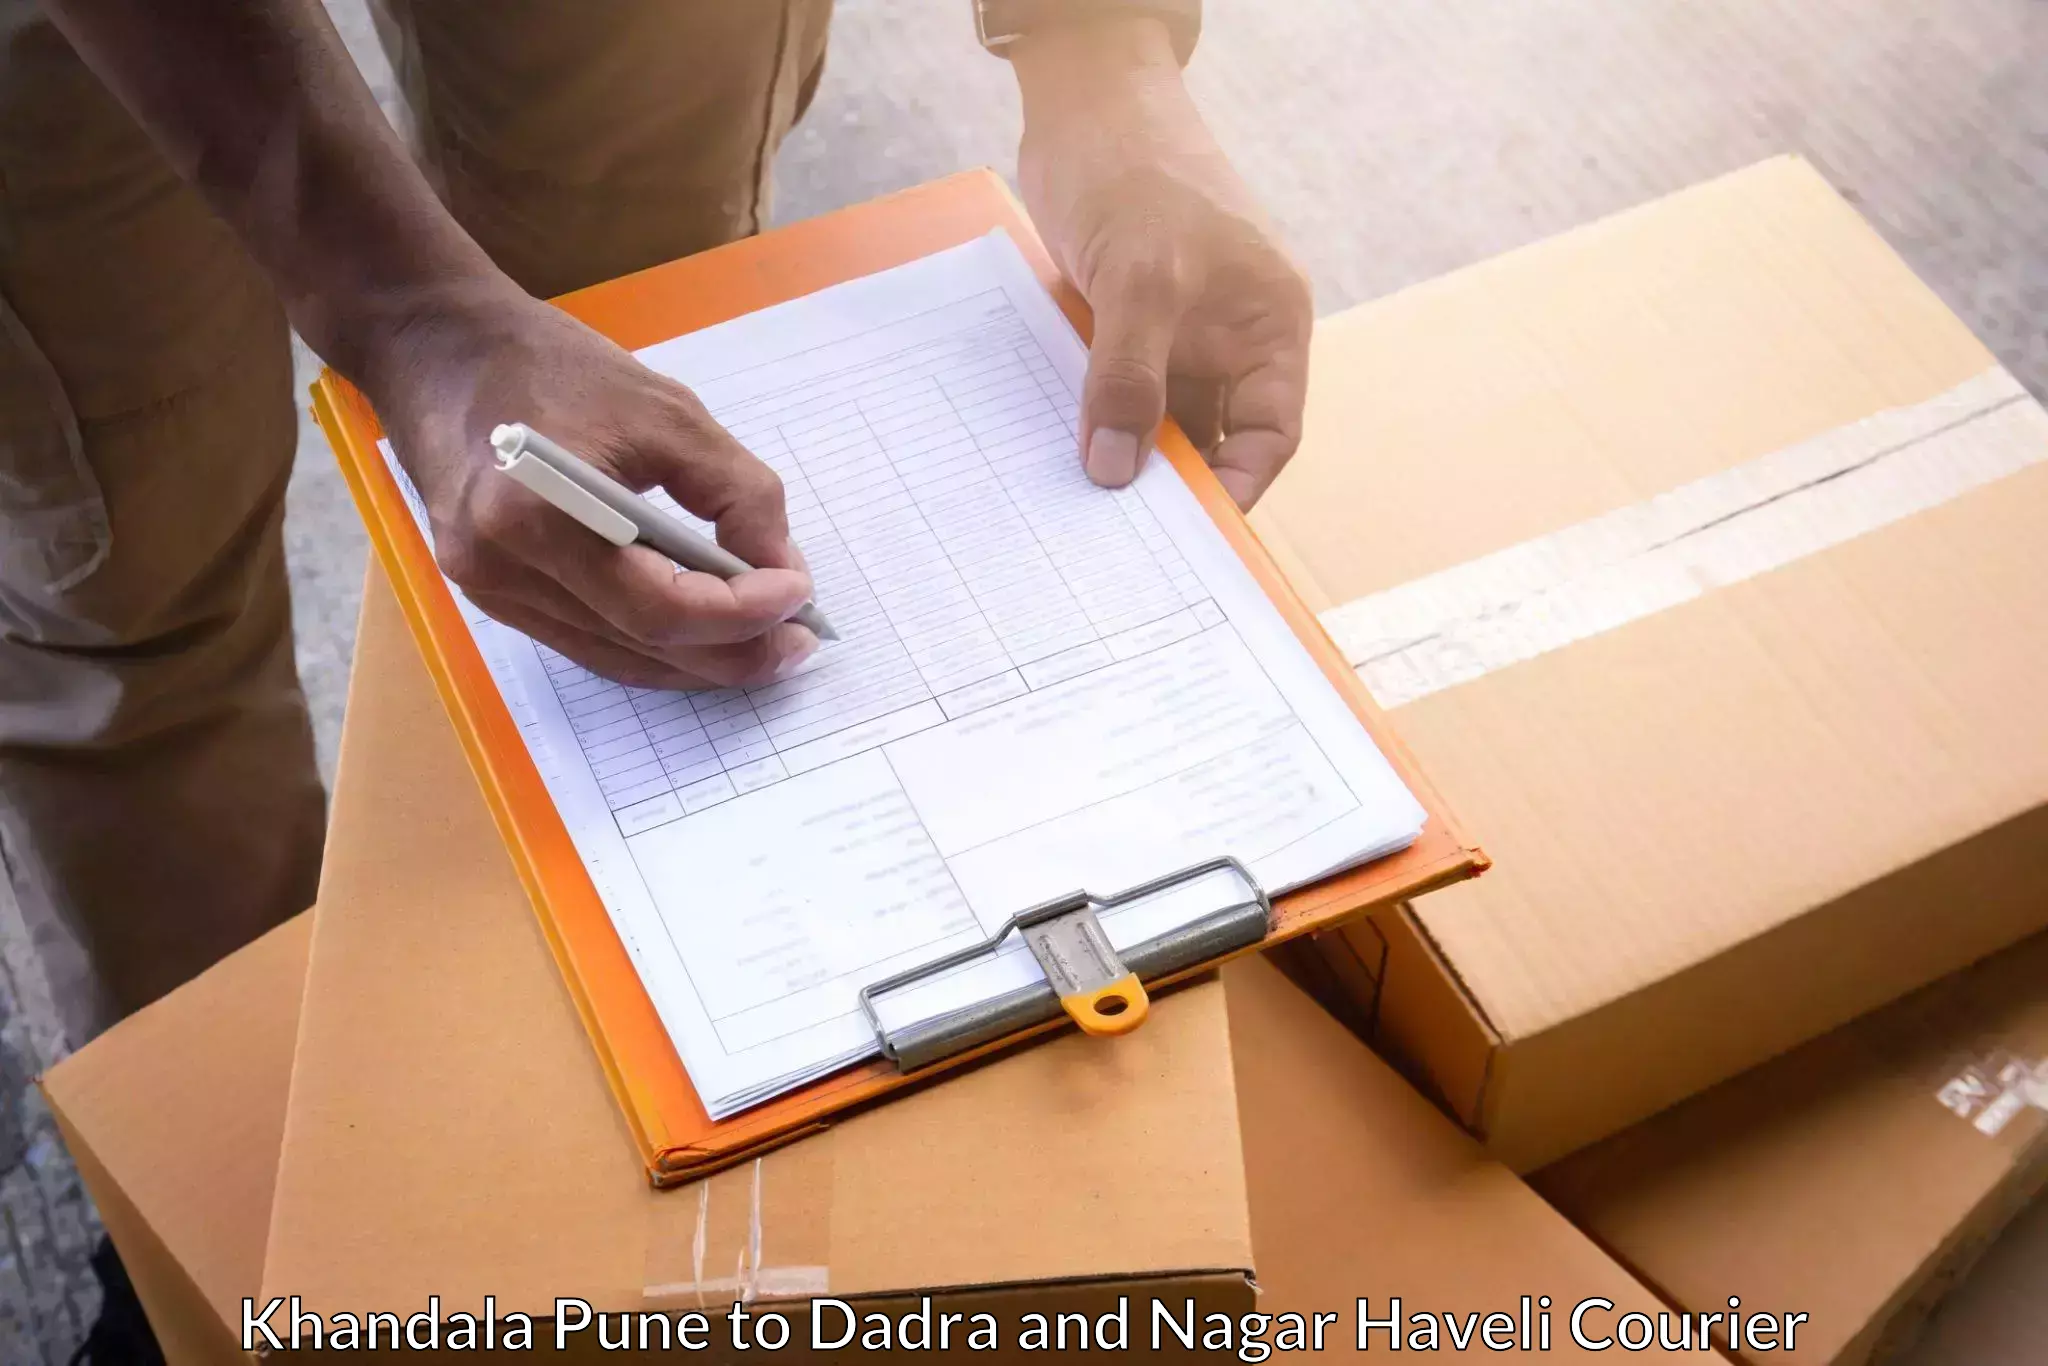 Fastest parcel delivery in Khandala Pune to Dadra and Nagar Haveli